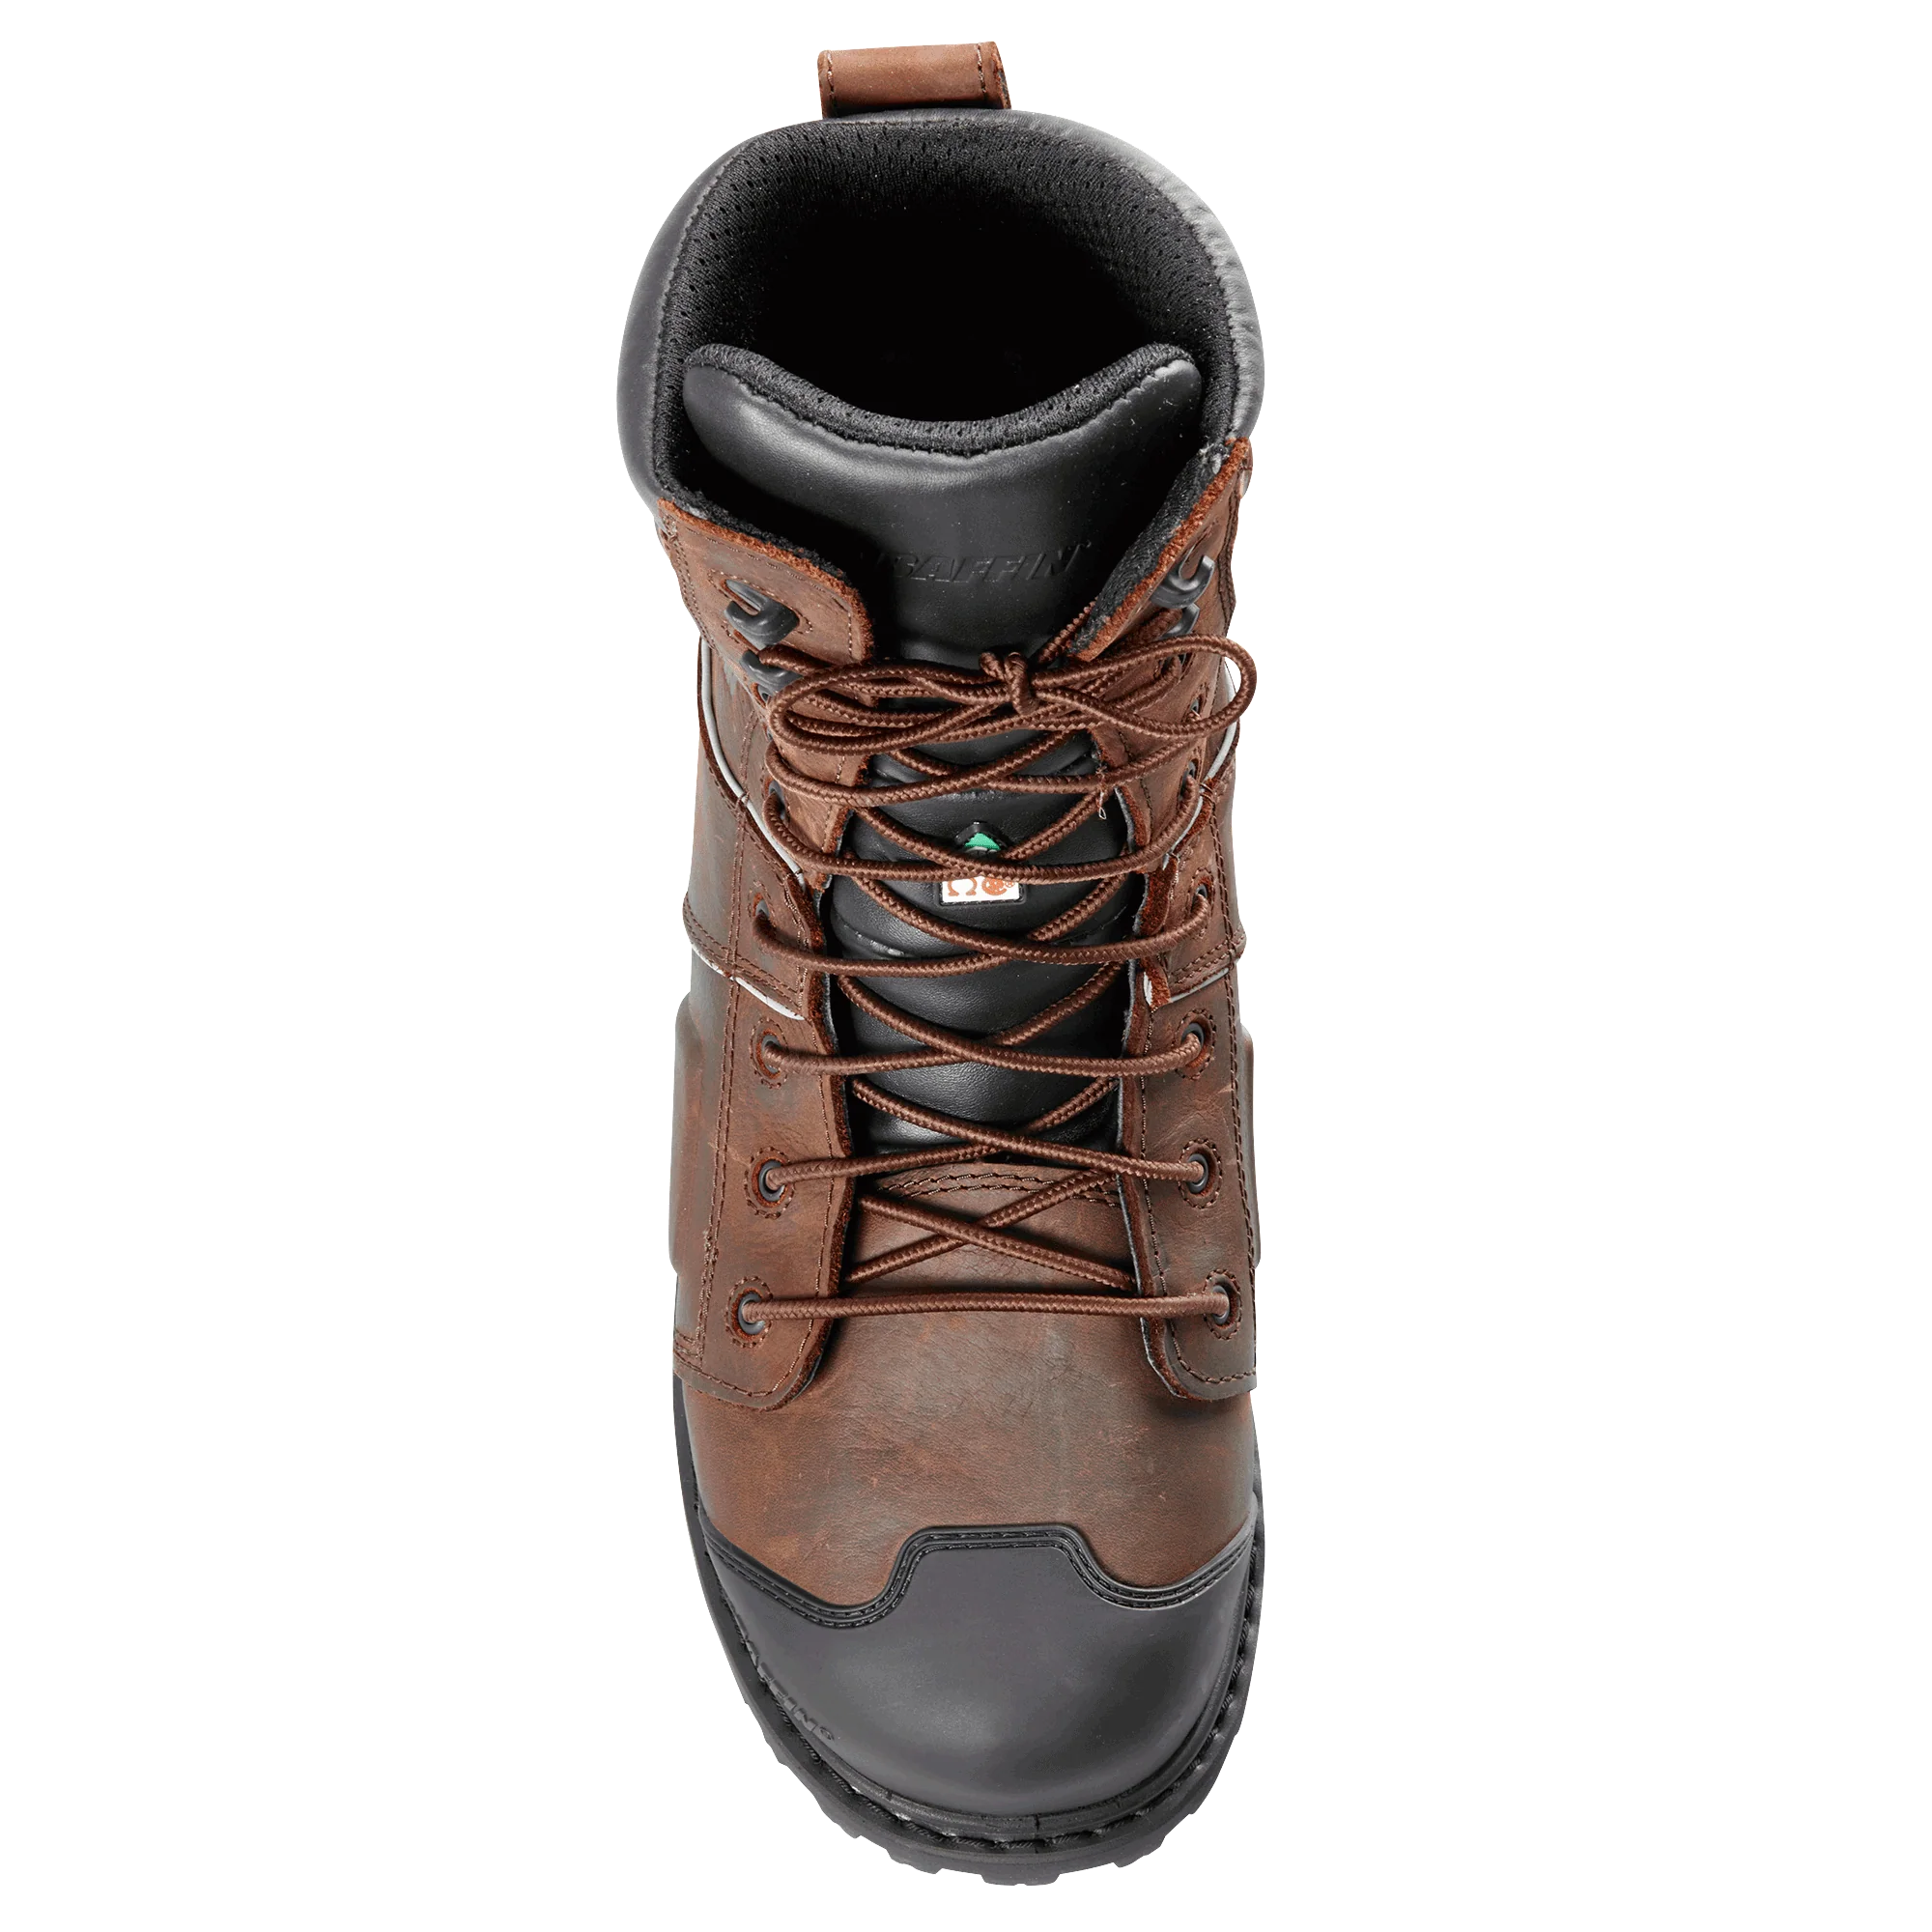 STC – Monster – Boot – #MNST-MP01 – Brown – Top